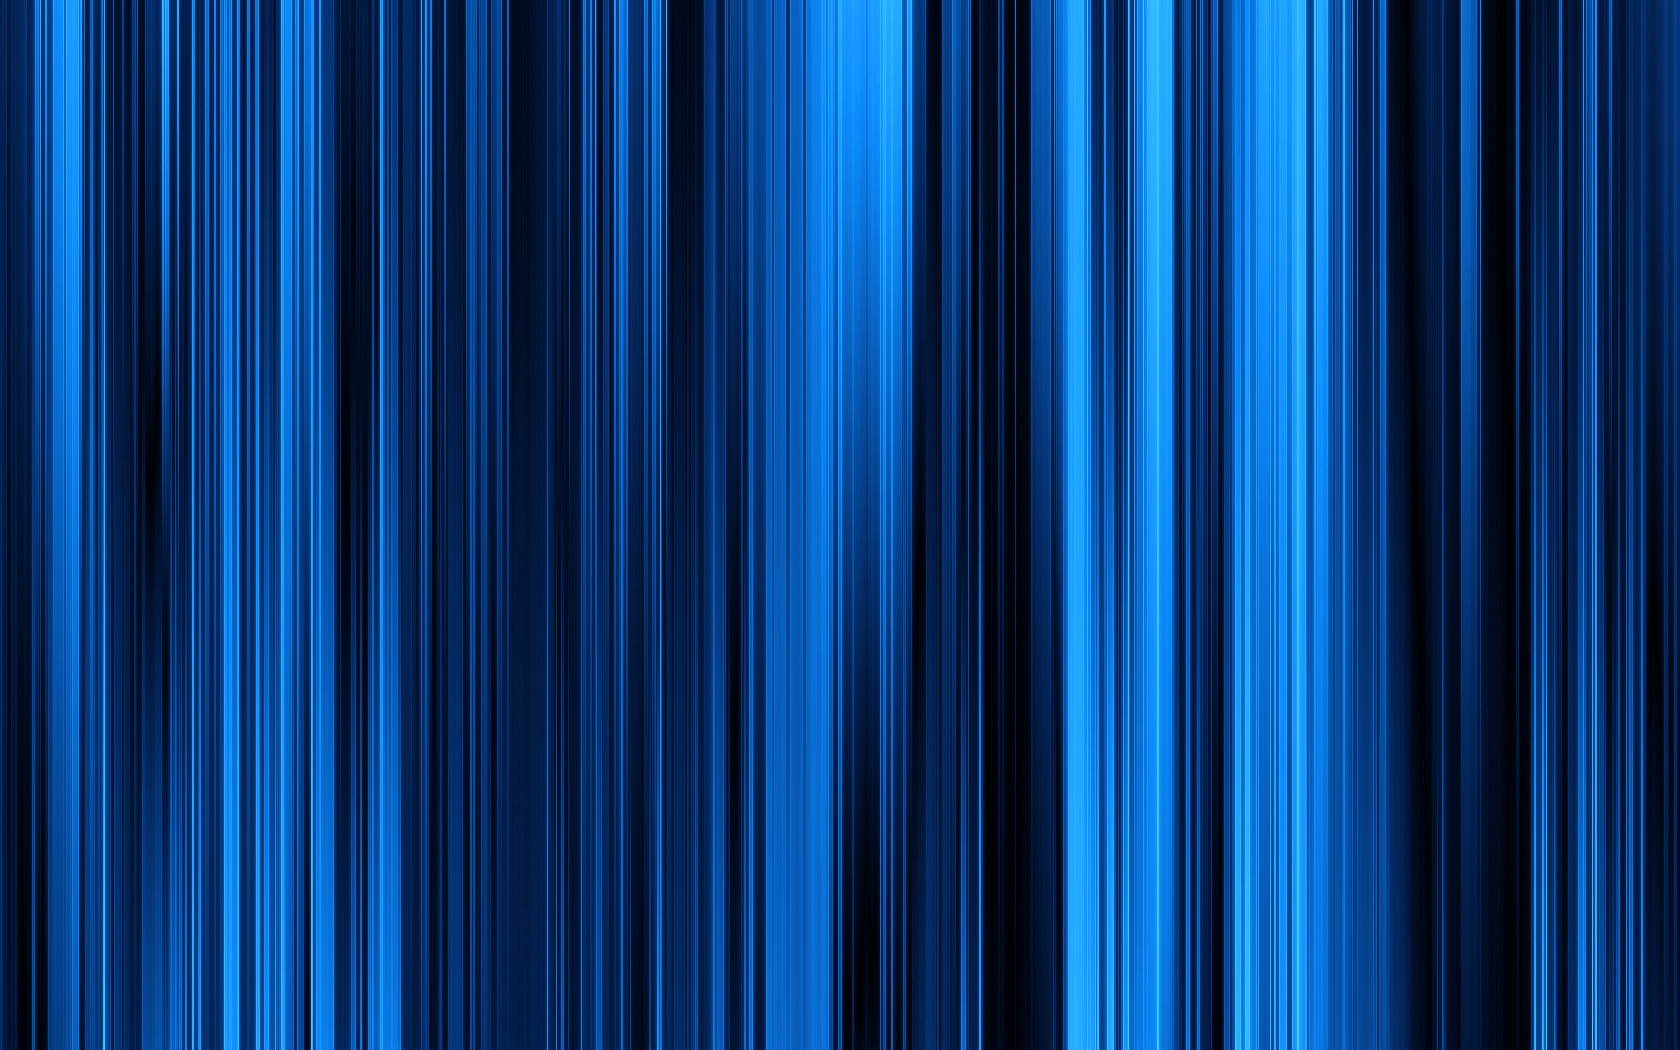 Black And Blue Stripes Wallpaper By Sxyfrg